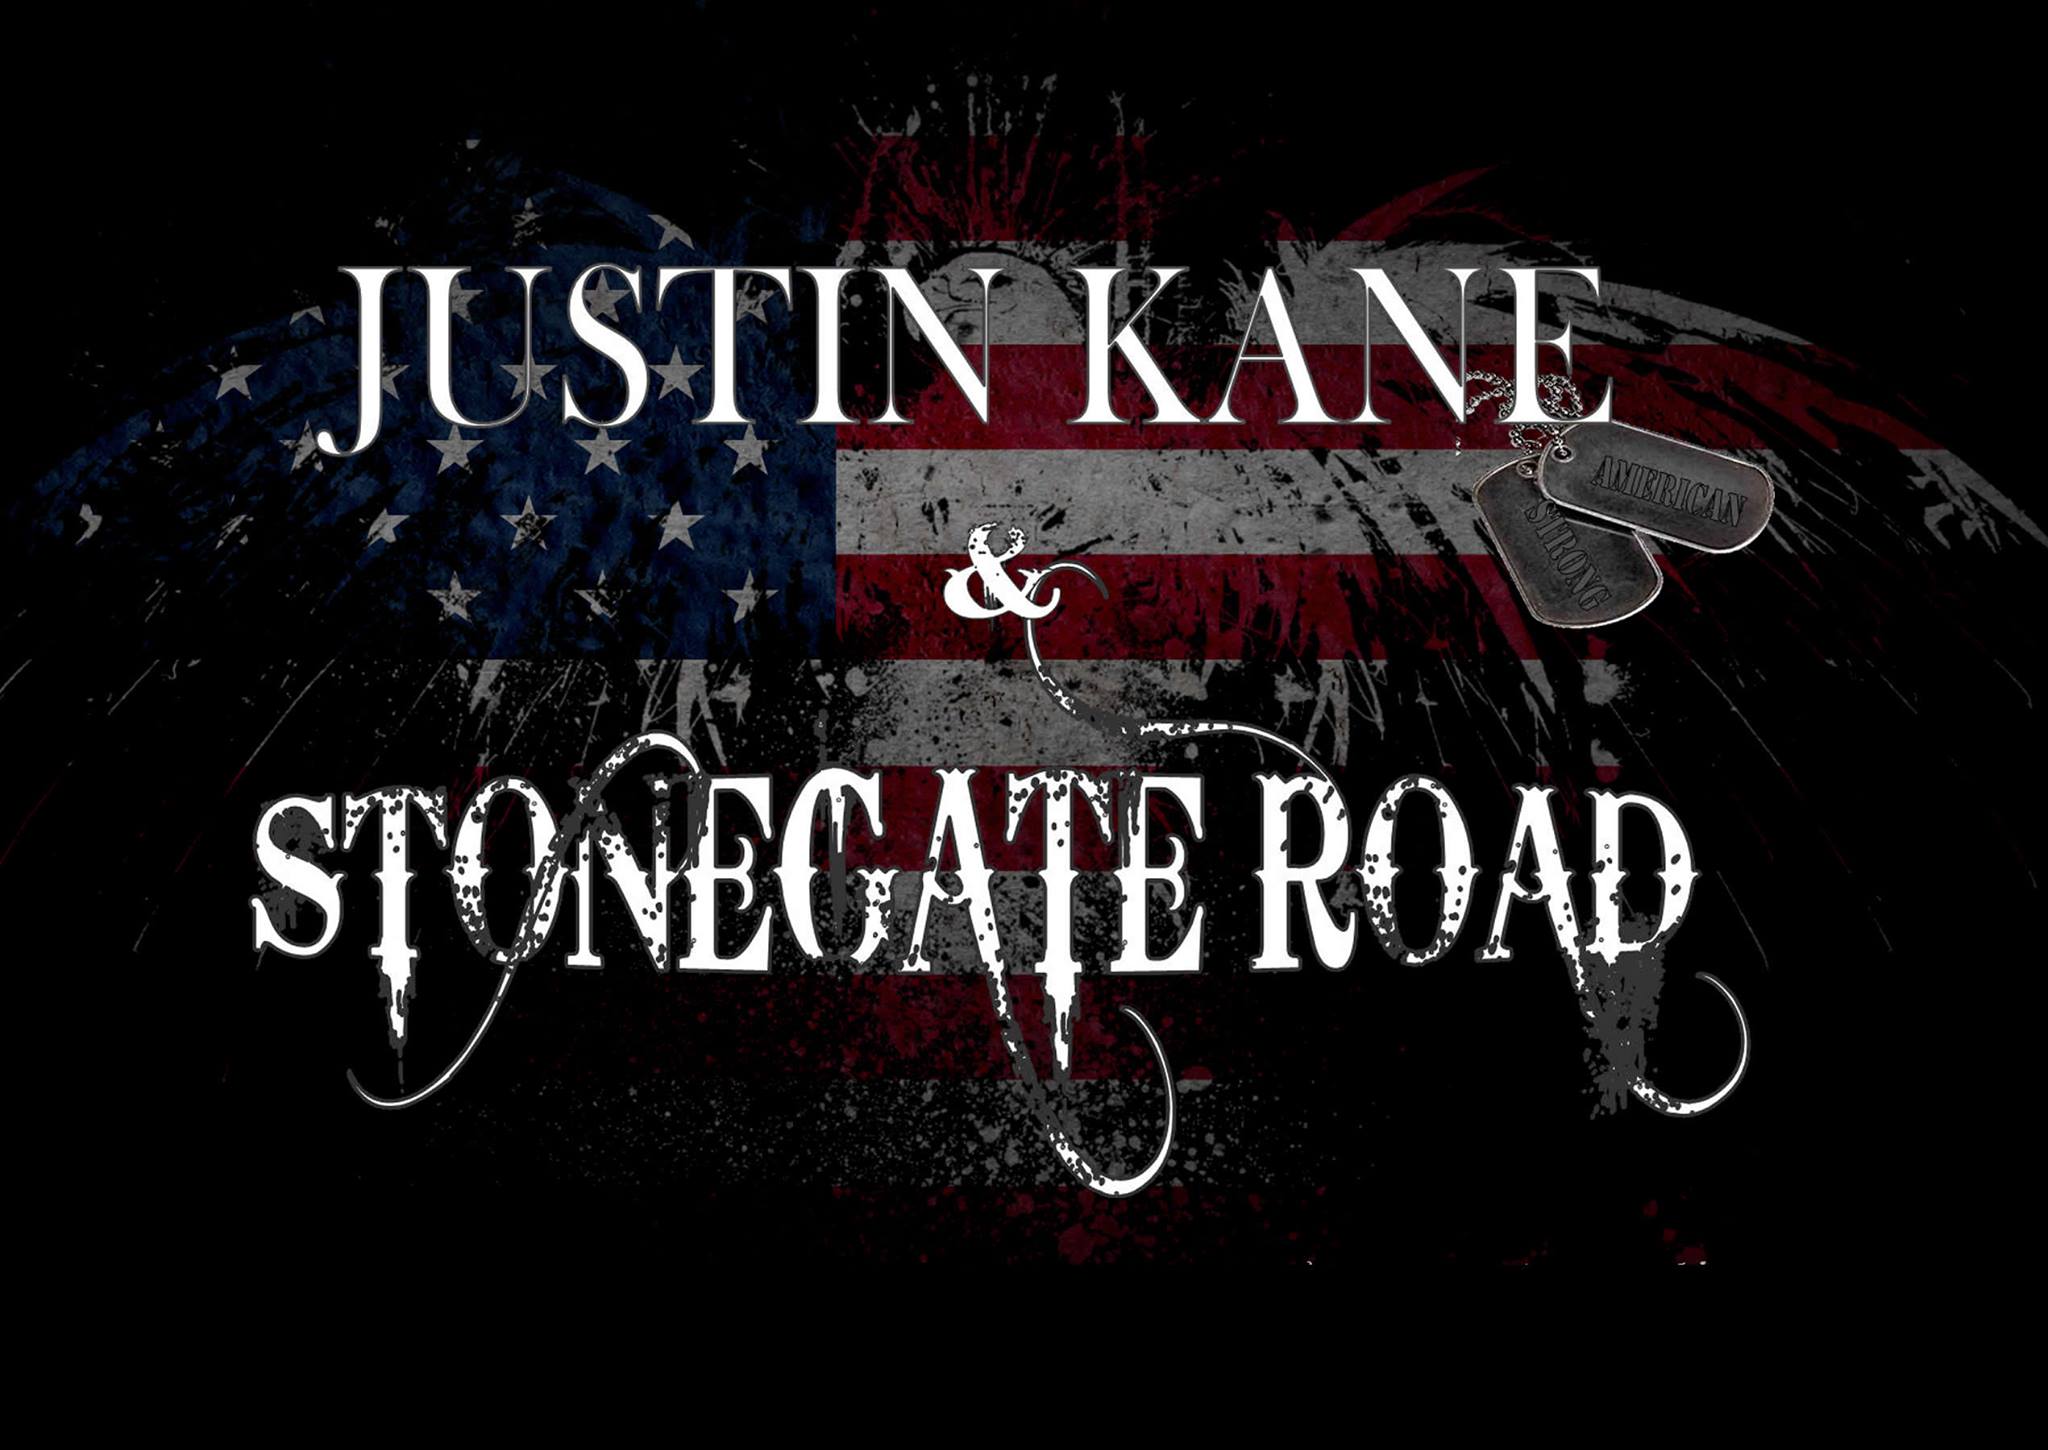 Live Music in O'Neill, NE - 
						Justin Kane & Stonegate Road 
						performing live at  
						Chesterfield West in O'Neill, Nebraska
						on Saturday, October 17, 2015